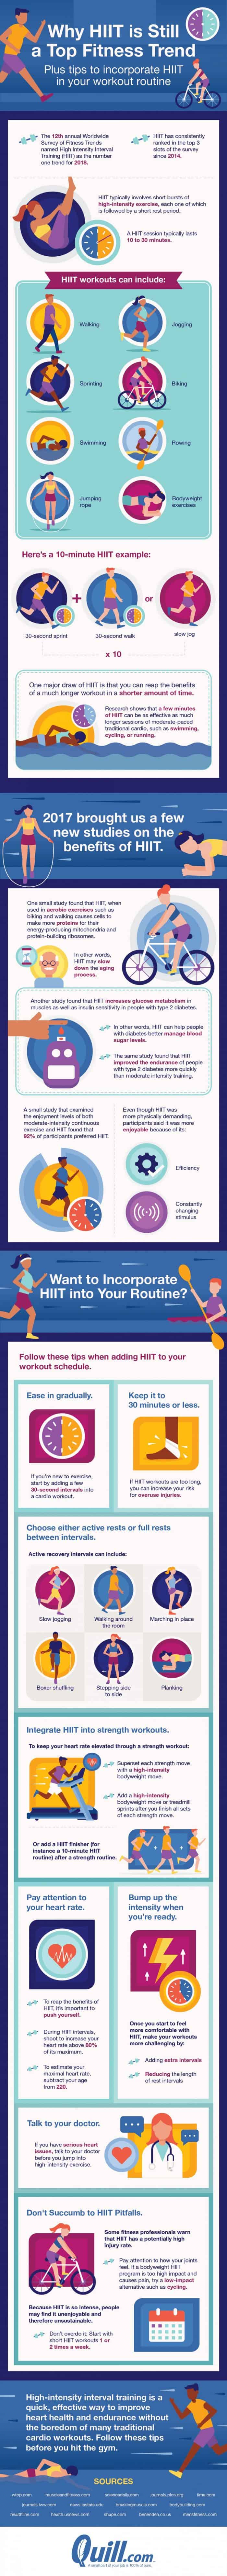 HIIT workouts infographic